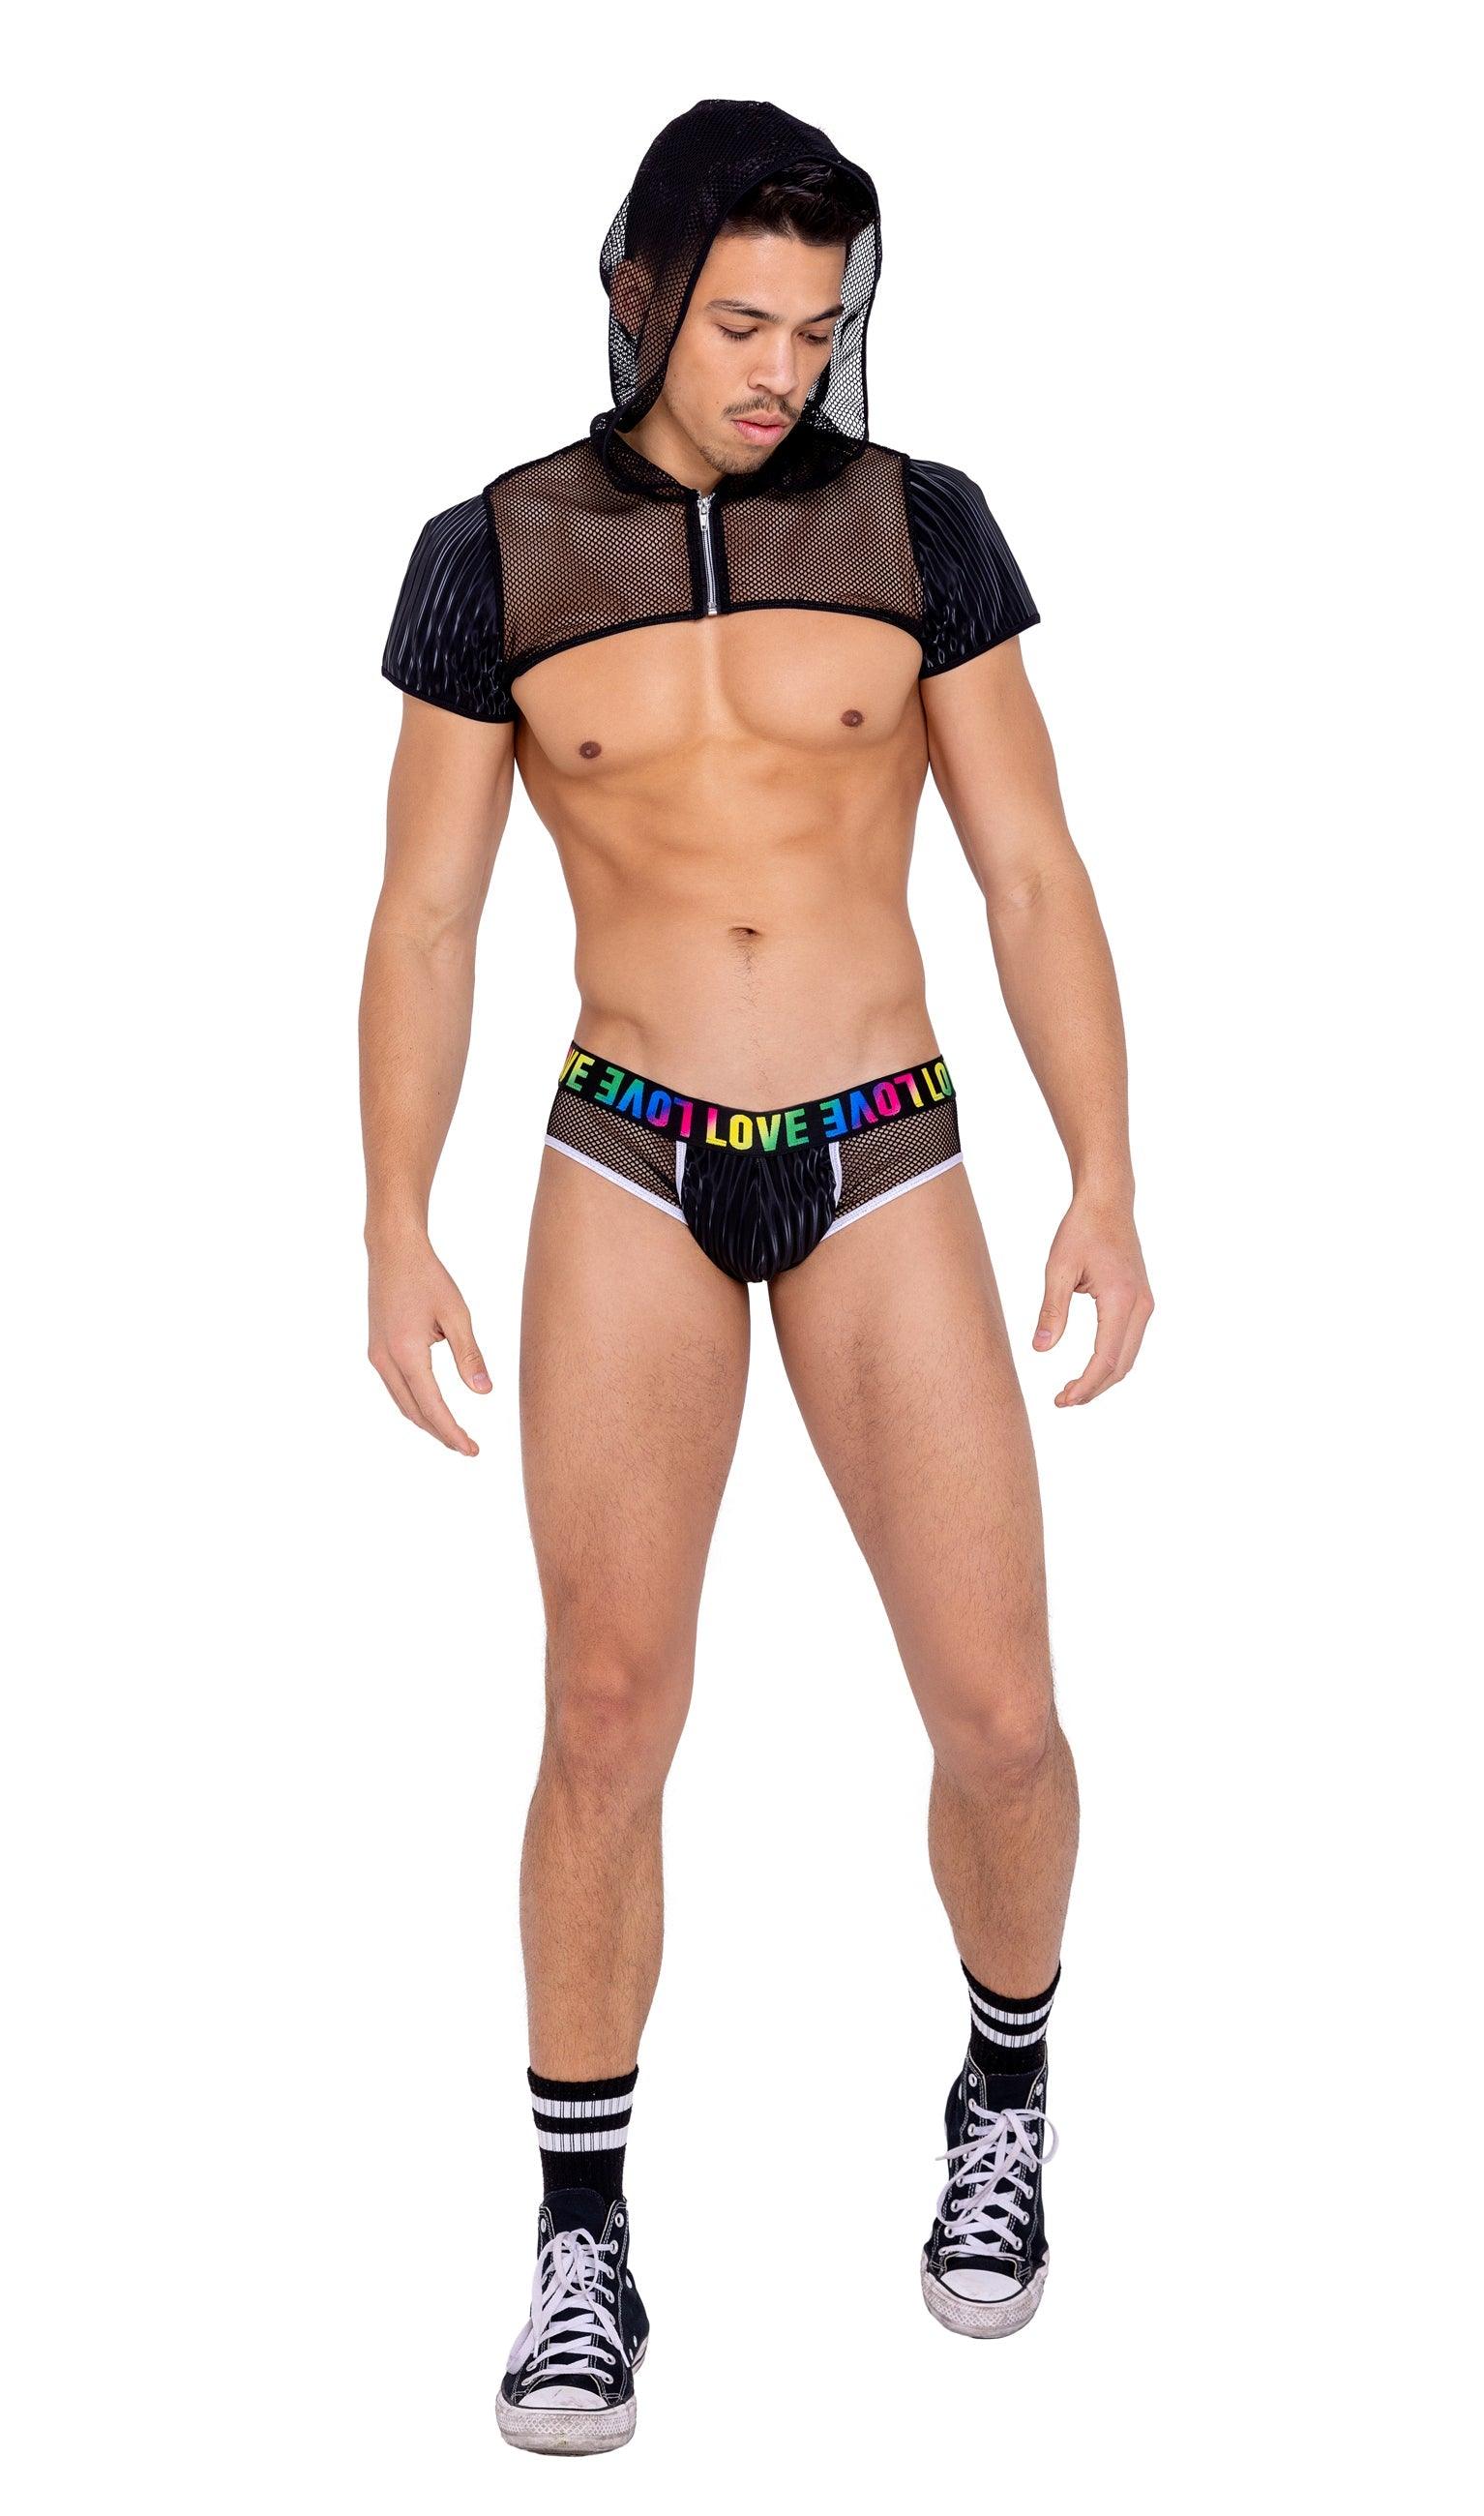 Roma Costume Mens Briefs with Fishnet Panel and LOVE Elastic Band - Flyclothing LLC